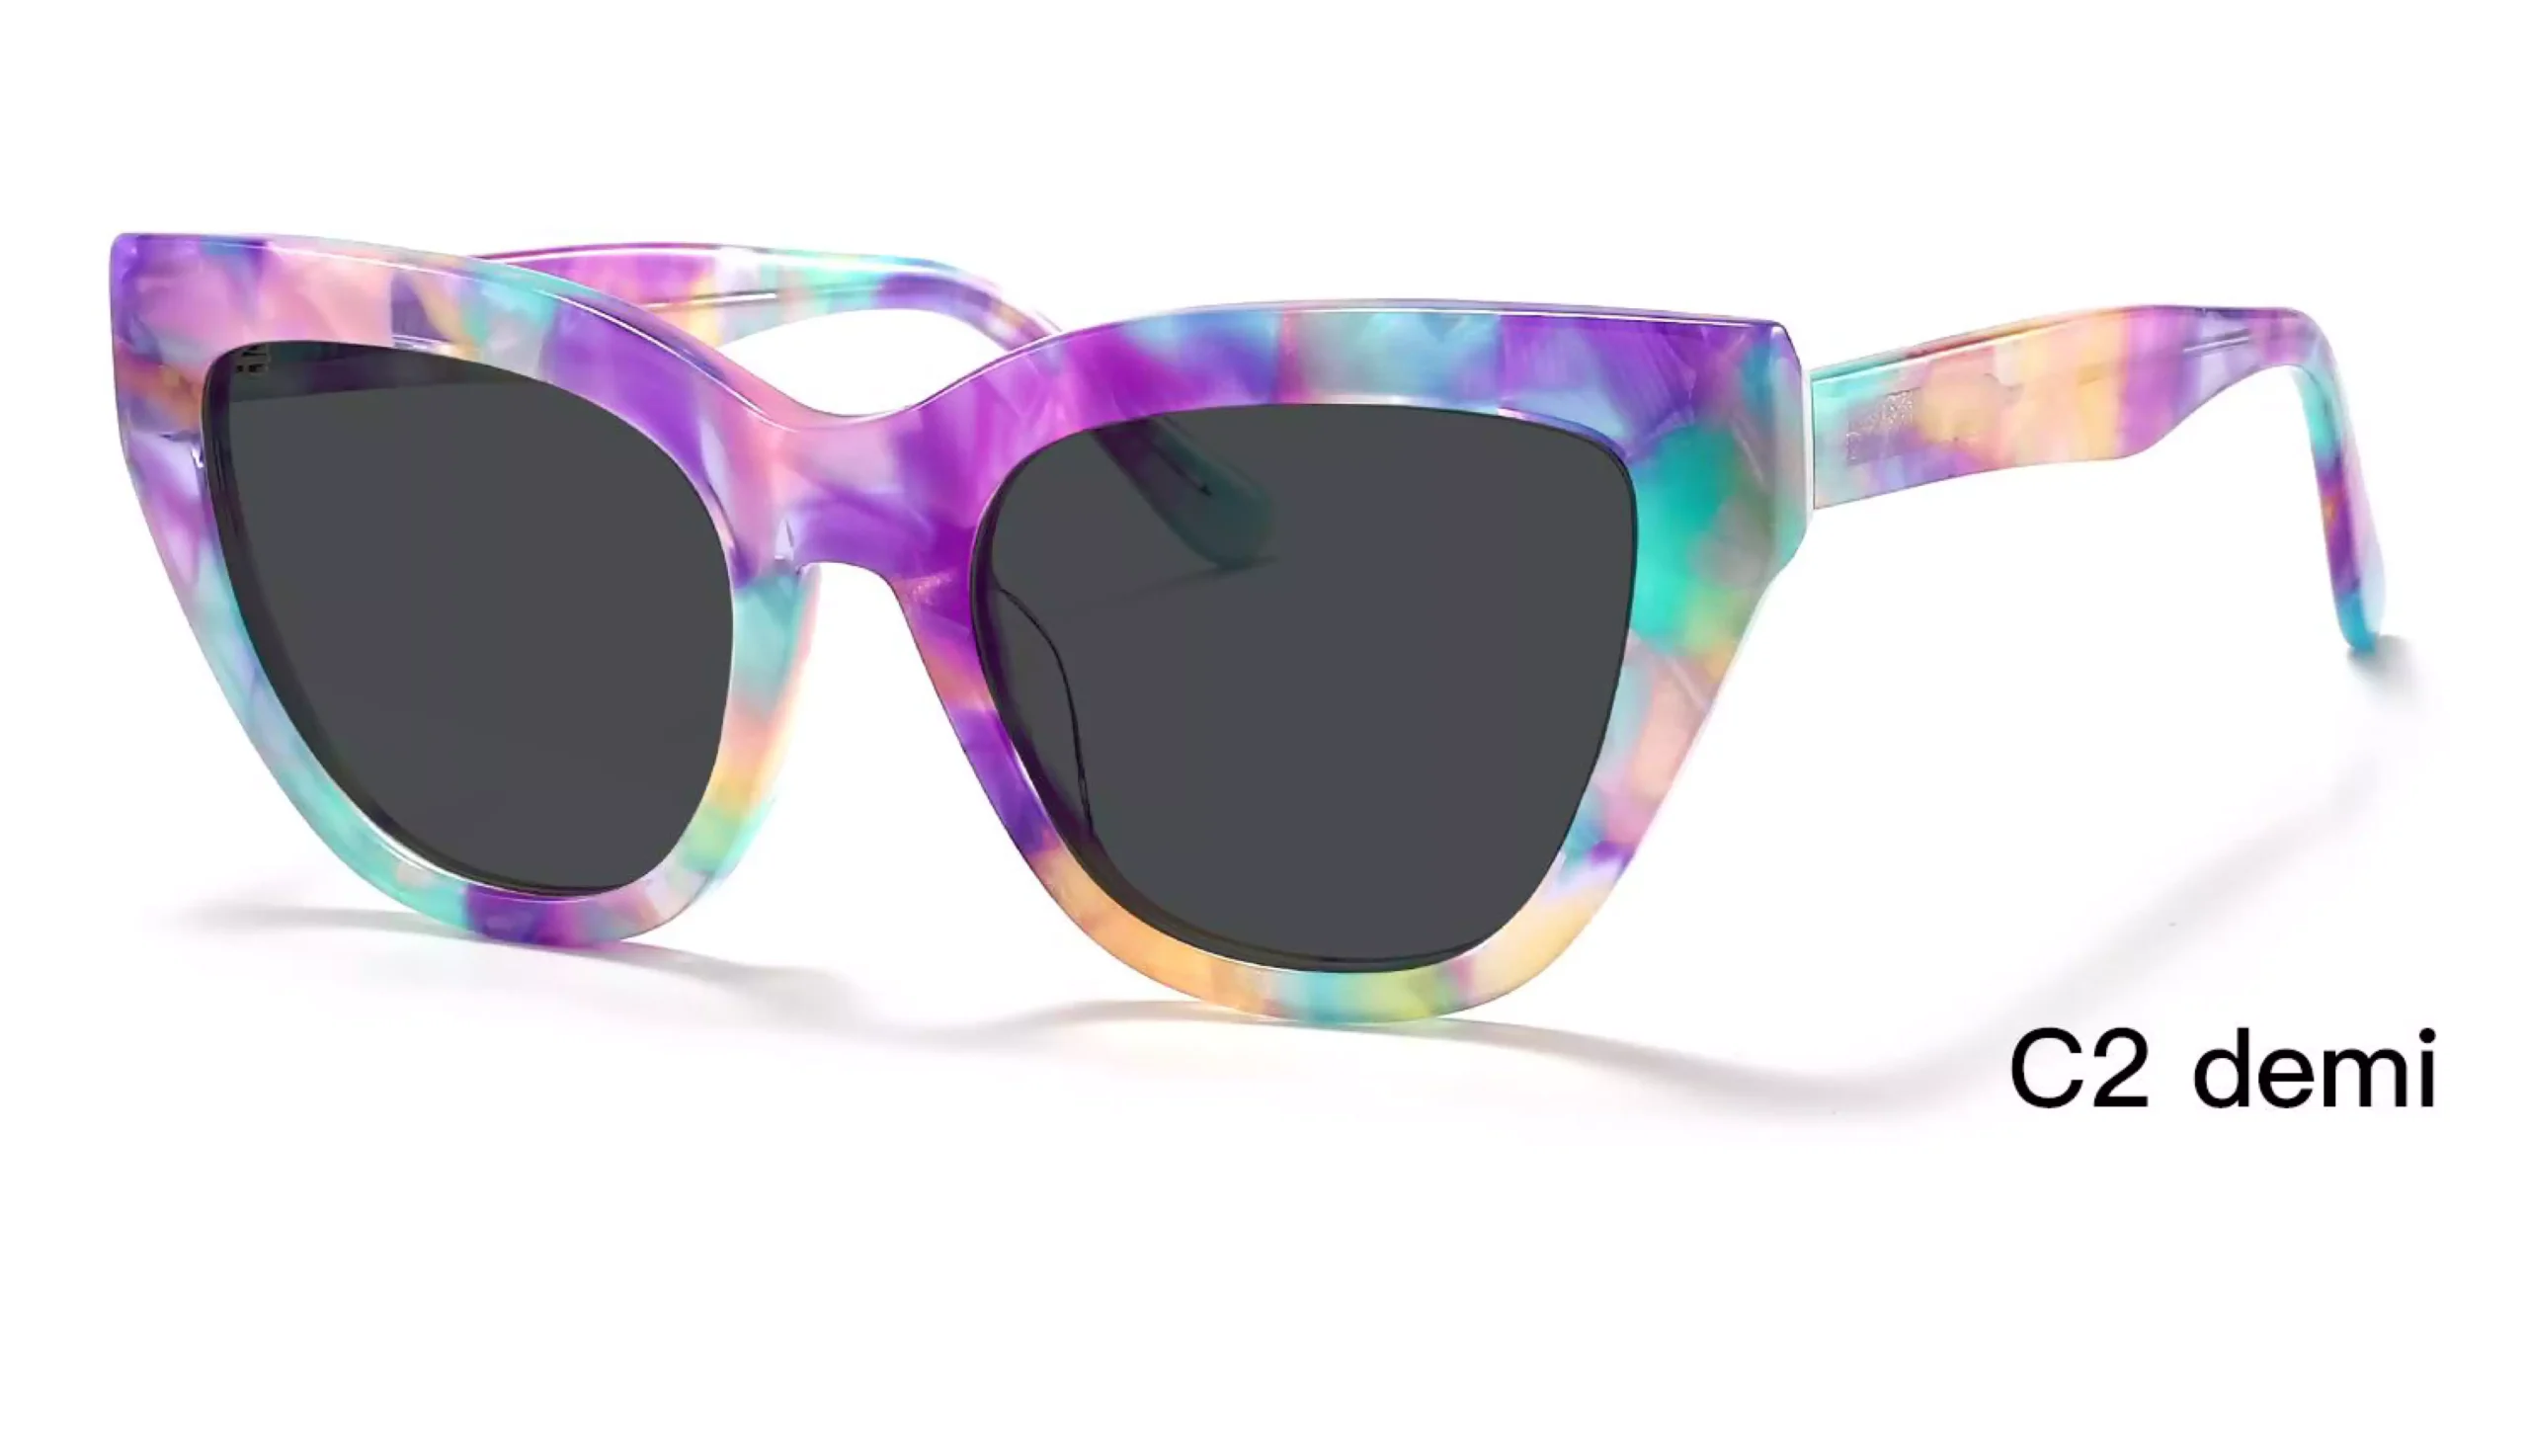 Wholesale Cat Eye Sunglasses, Demi, Dreamy Purple, crystal clear, acetate, care vision, UV protection